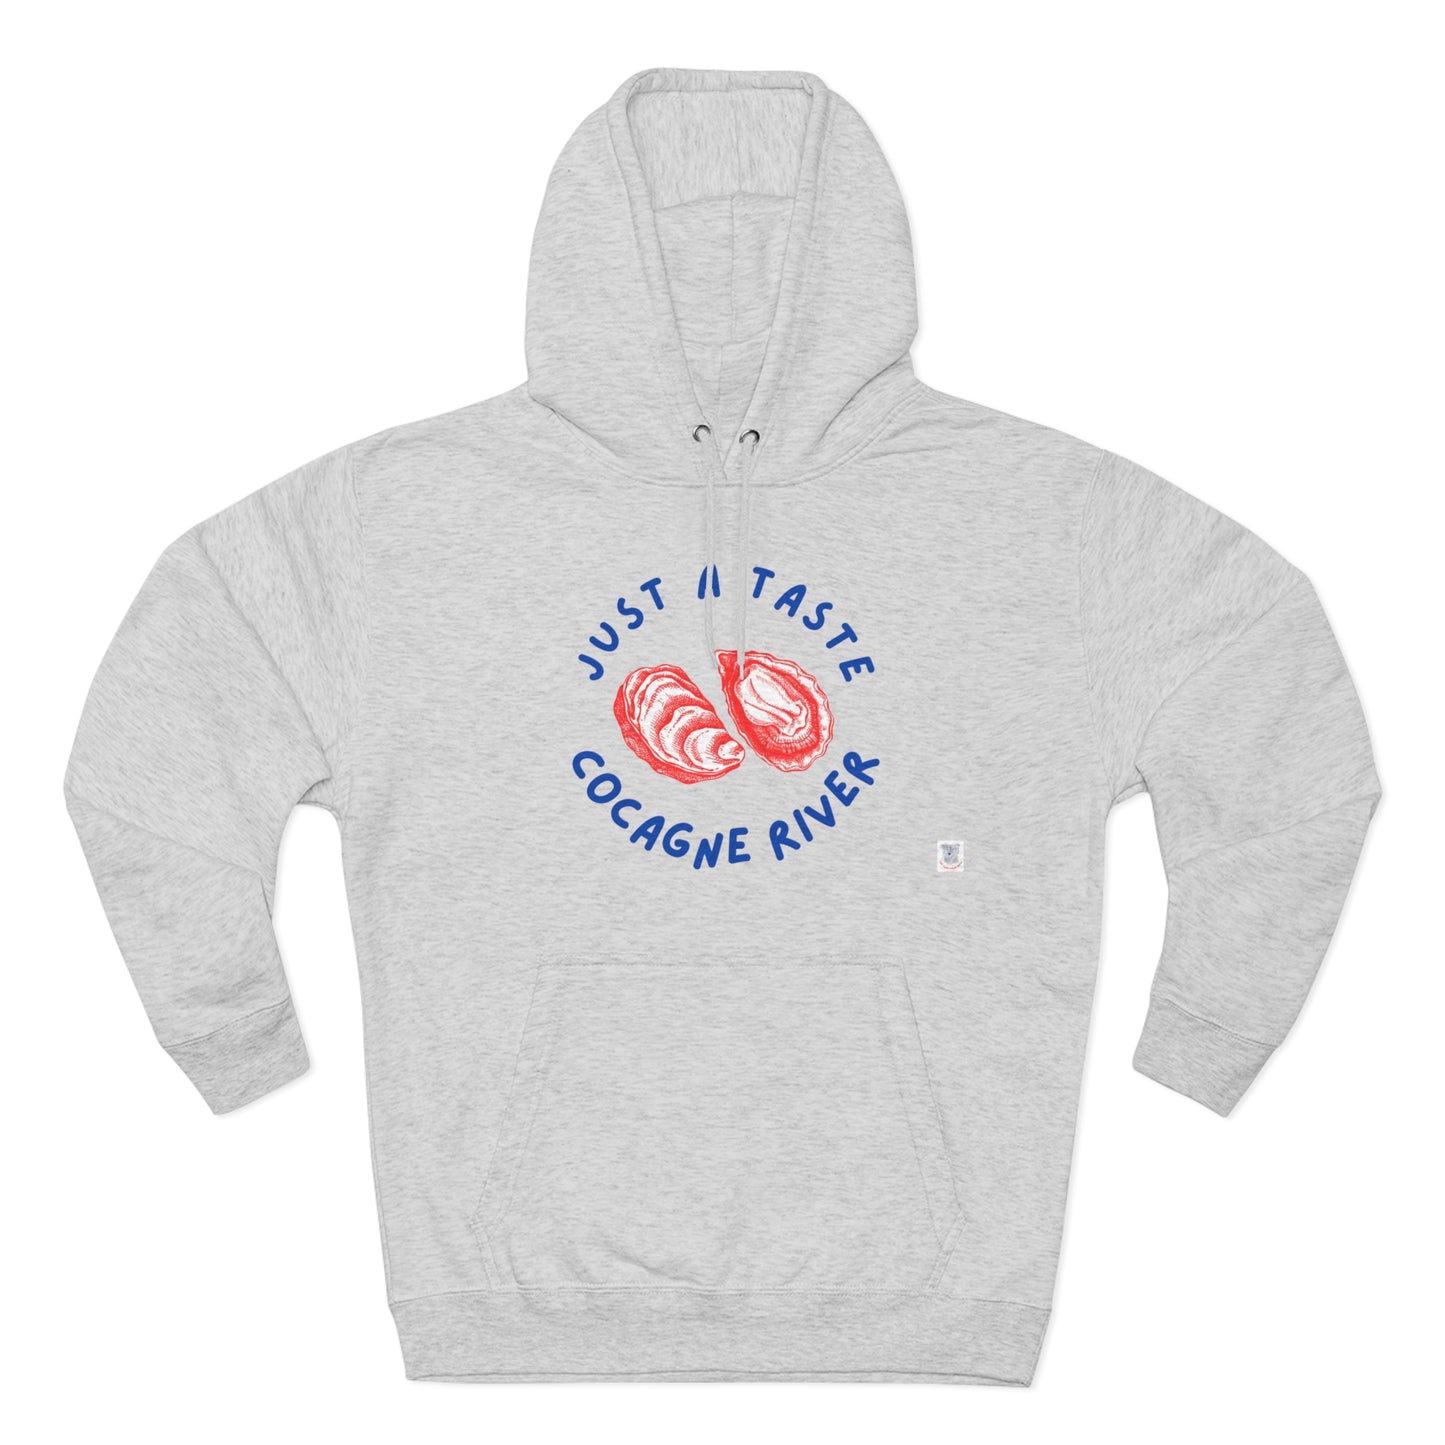 Cocagne River New Brunswick Pullover Hoodie